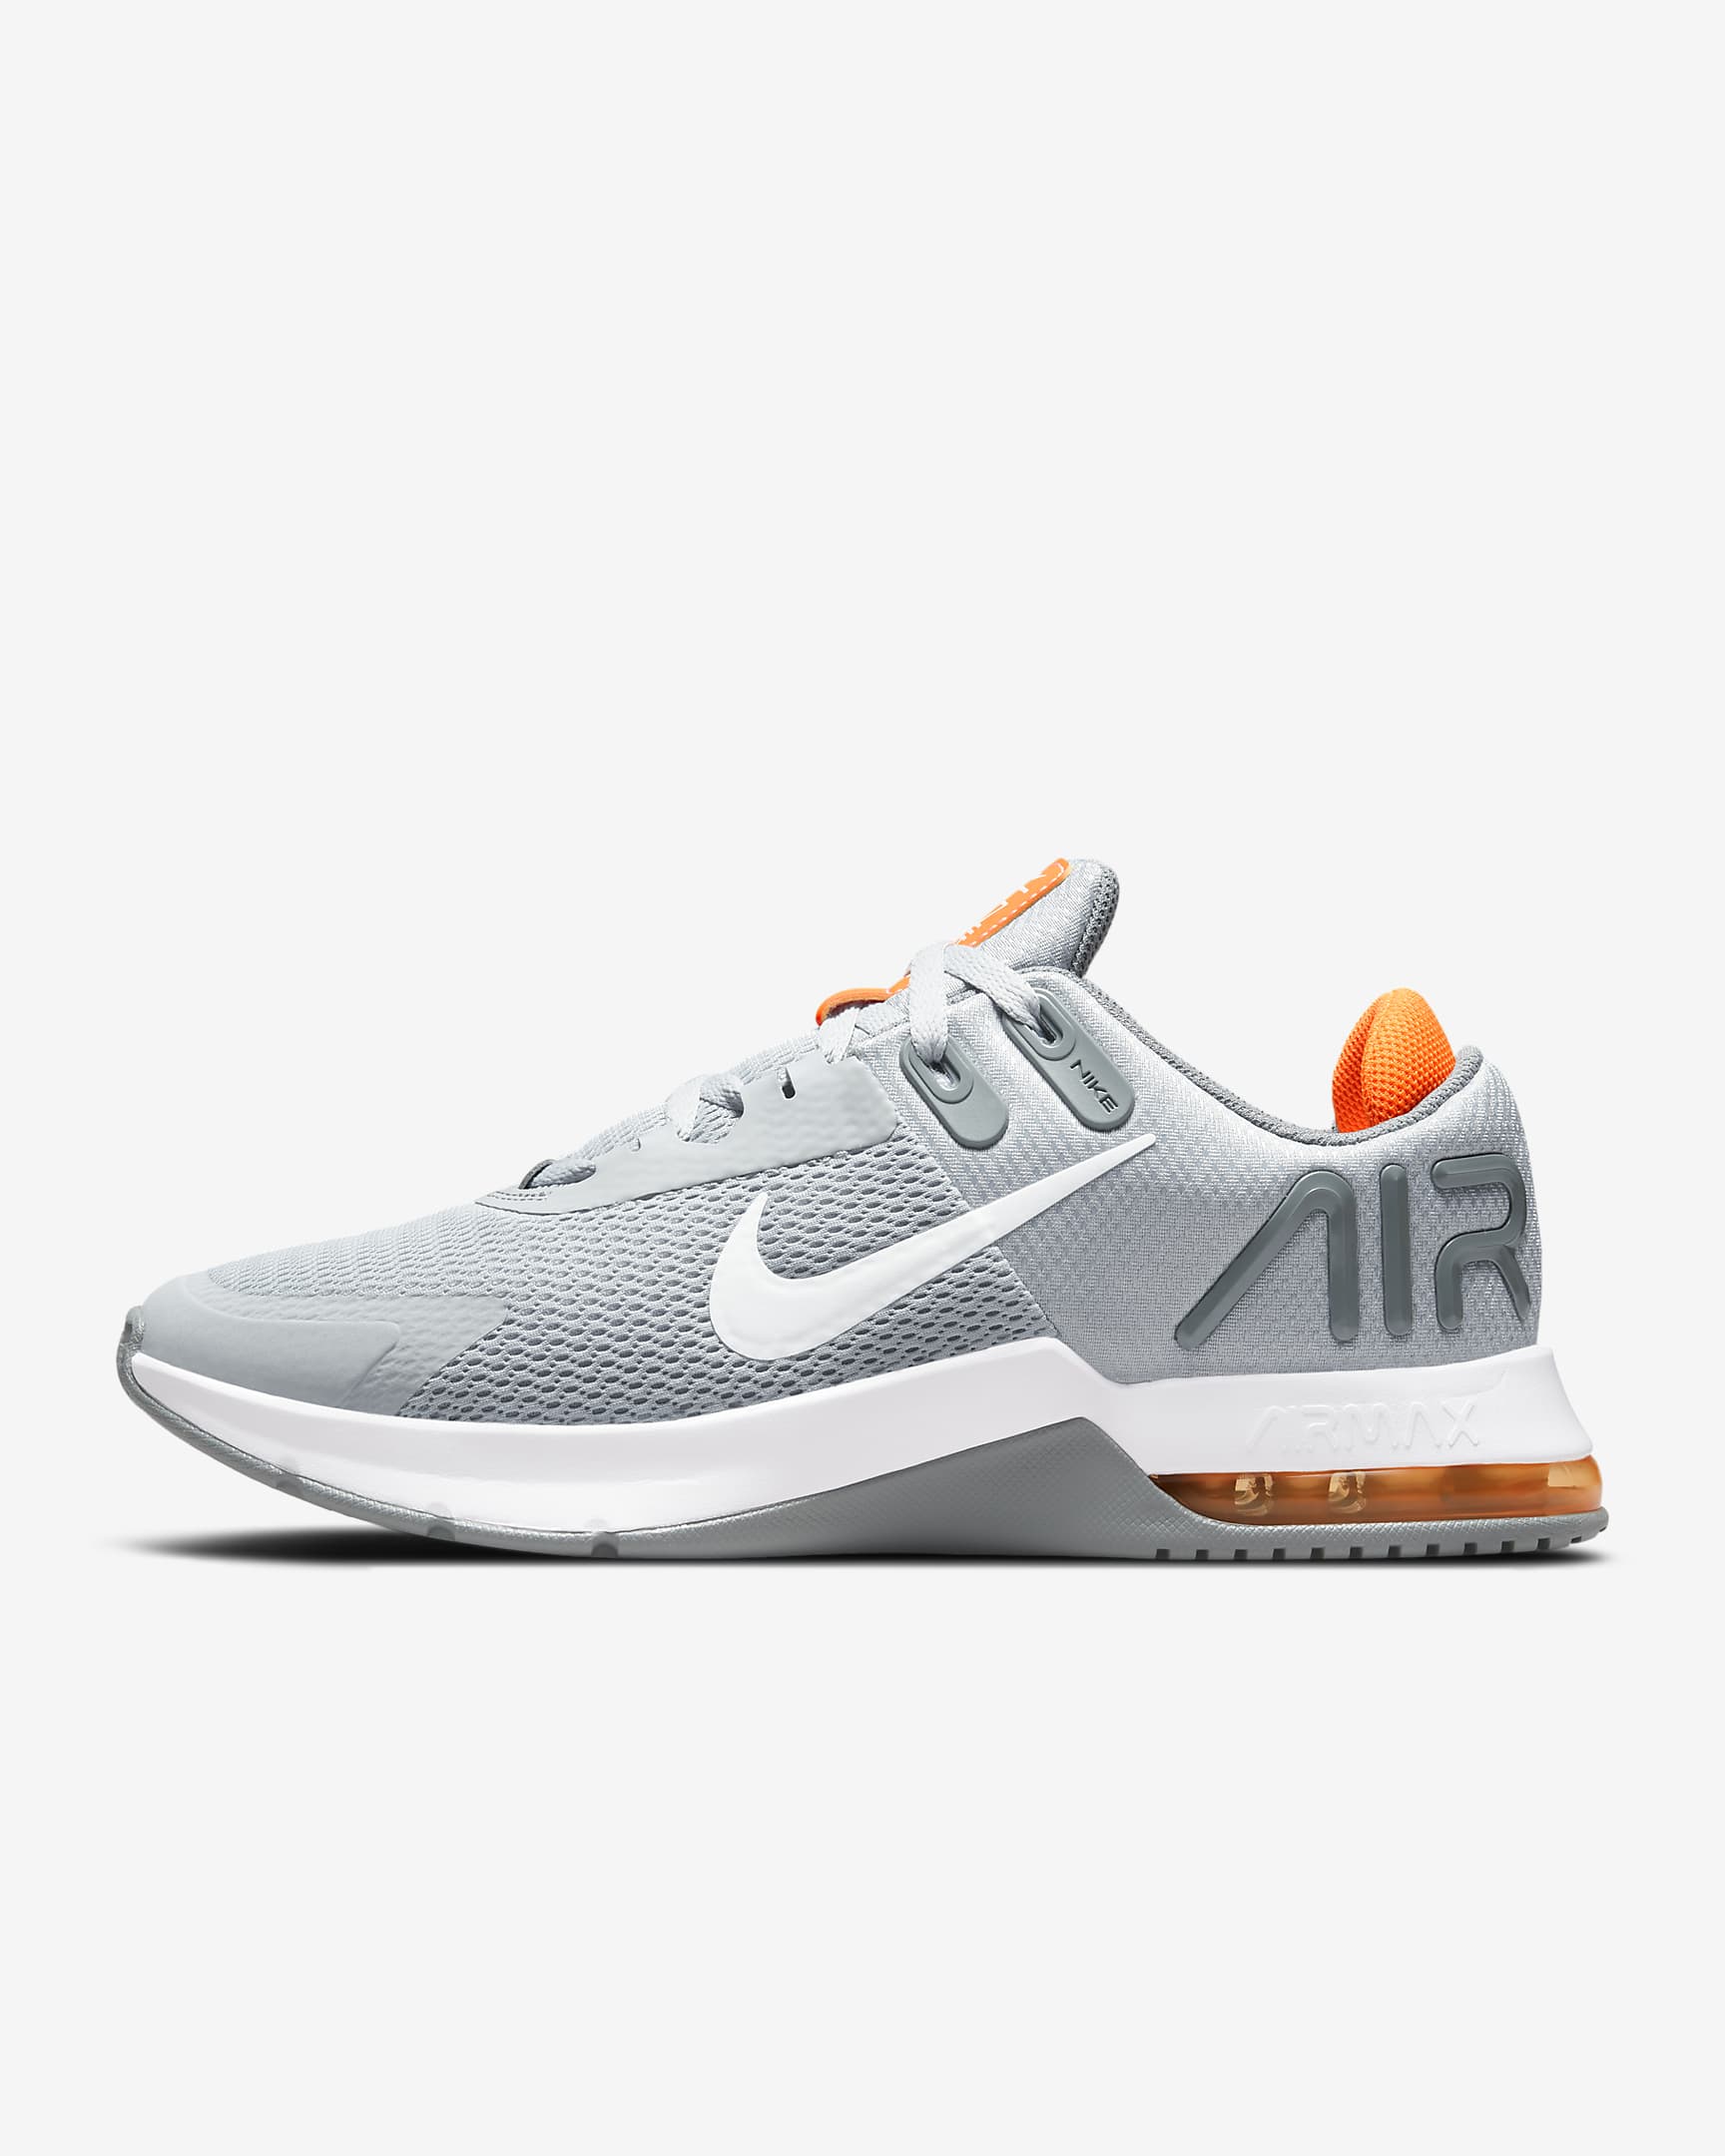 Nike Air Max Alpha Trainer 4 Men's Workout Shoes. Nike IL